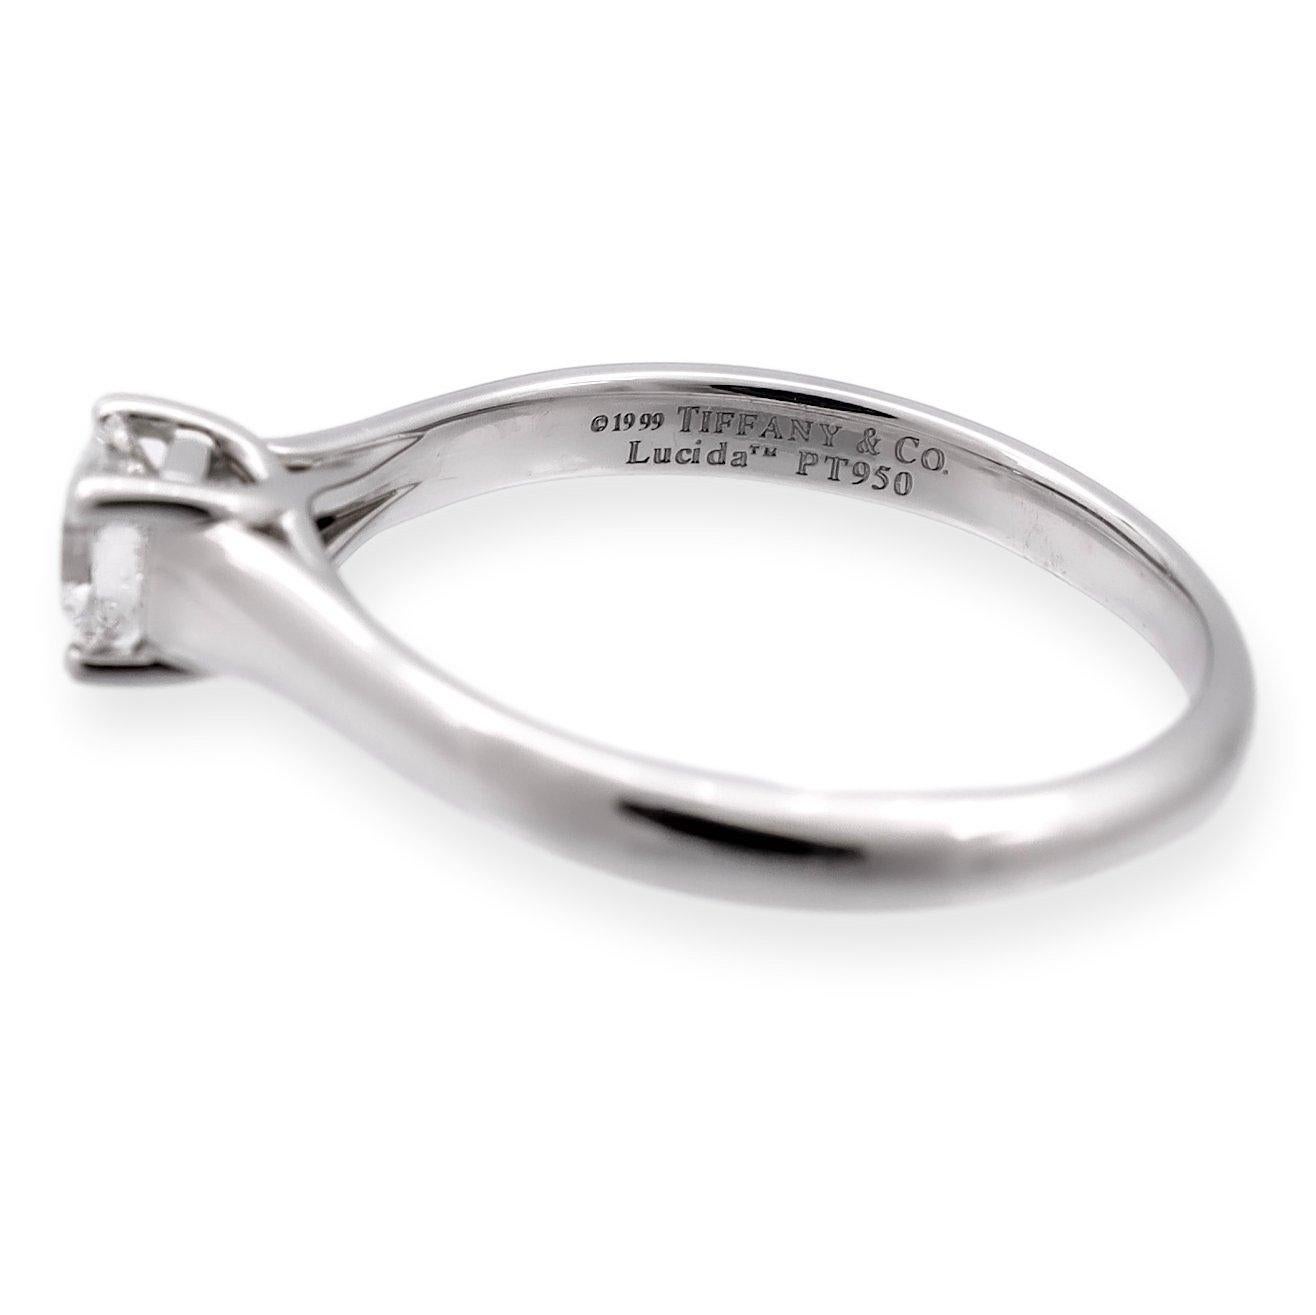 Tiffany & Co. engagement ring from the Lucida collection finely crafted in Platinum featuring a 0.34 carat center, E-F color and VVS1-VVS2 clarity. Graded by the Gemological Institute of America. Fully hallmarked with logo, serial number and metal